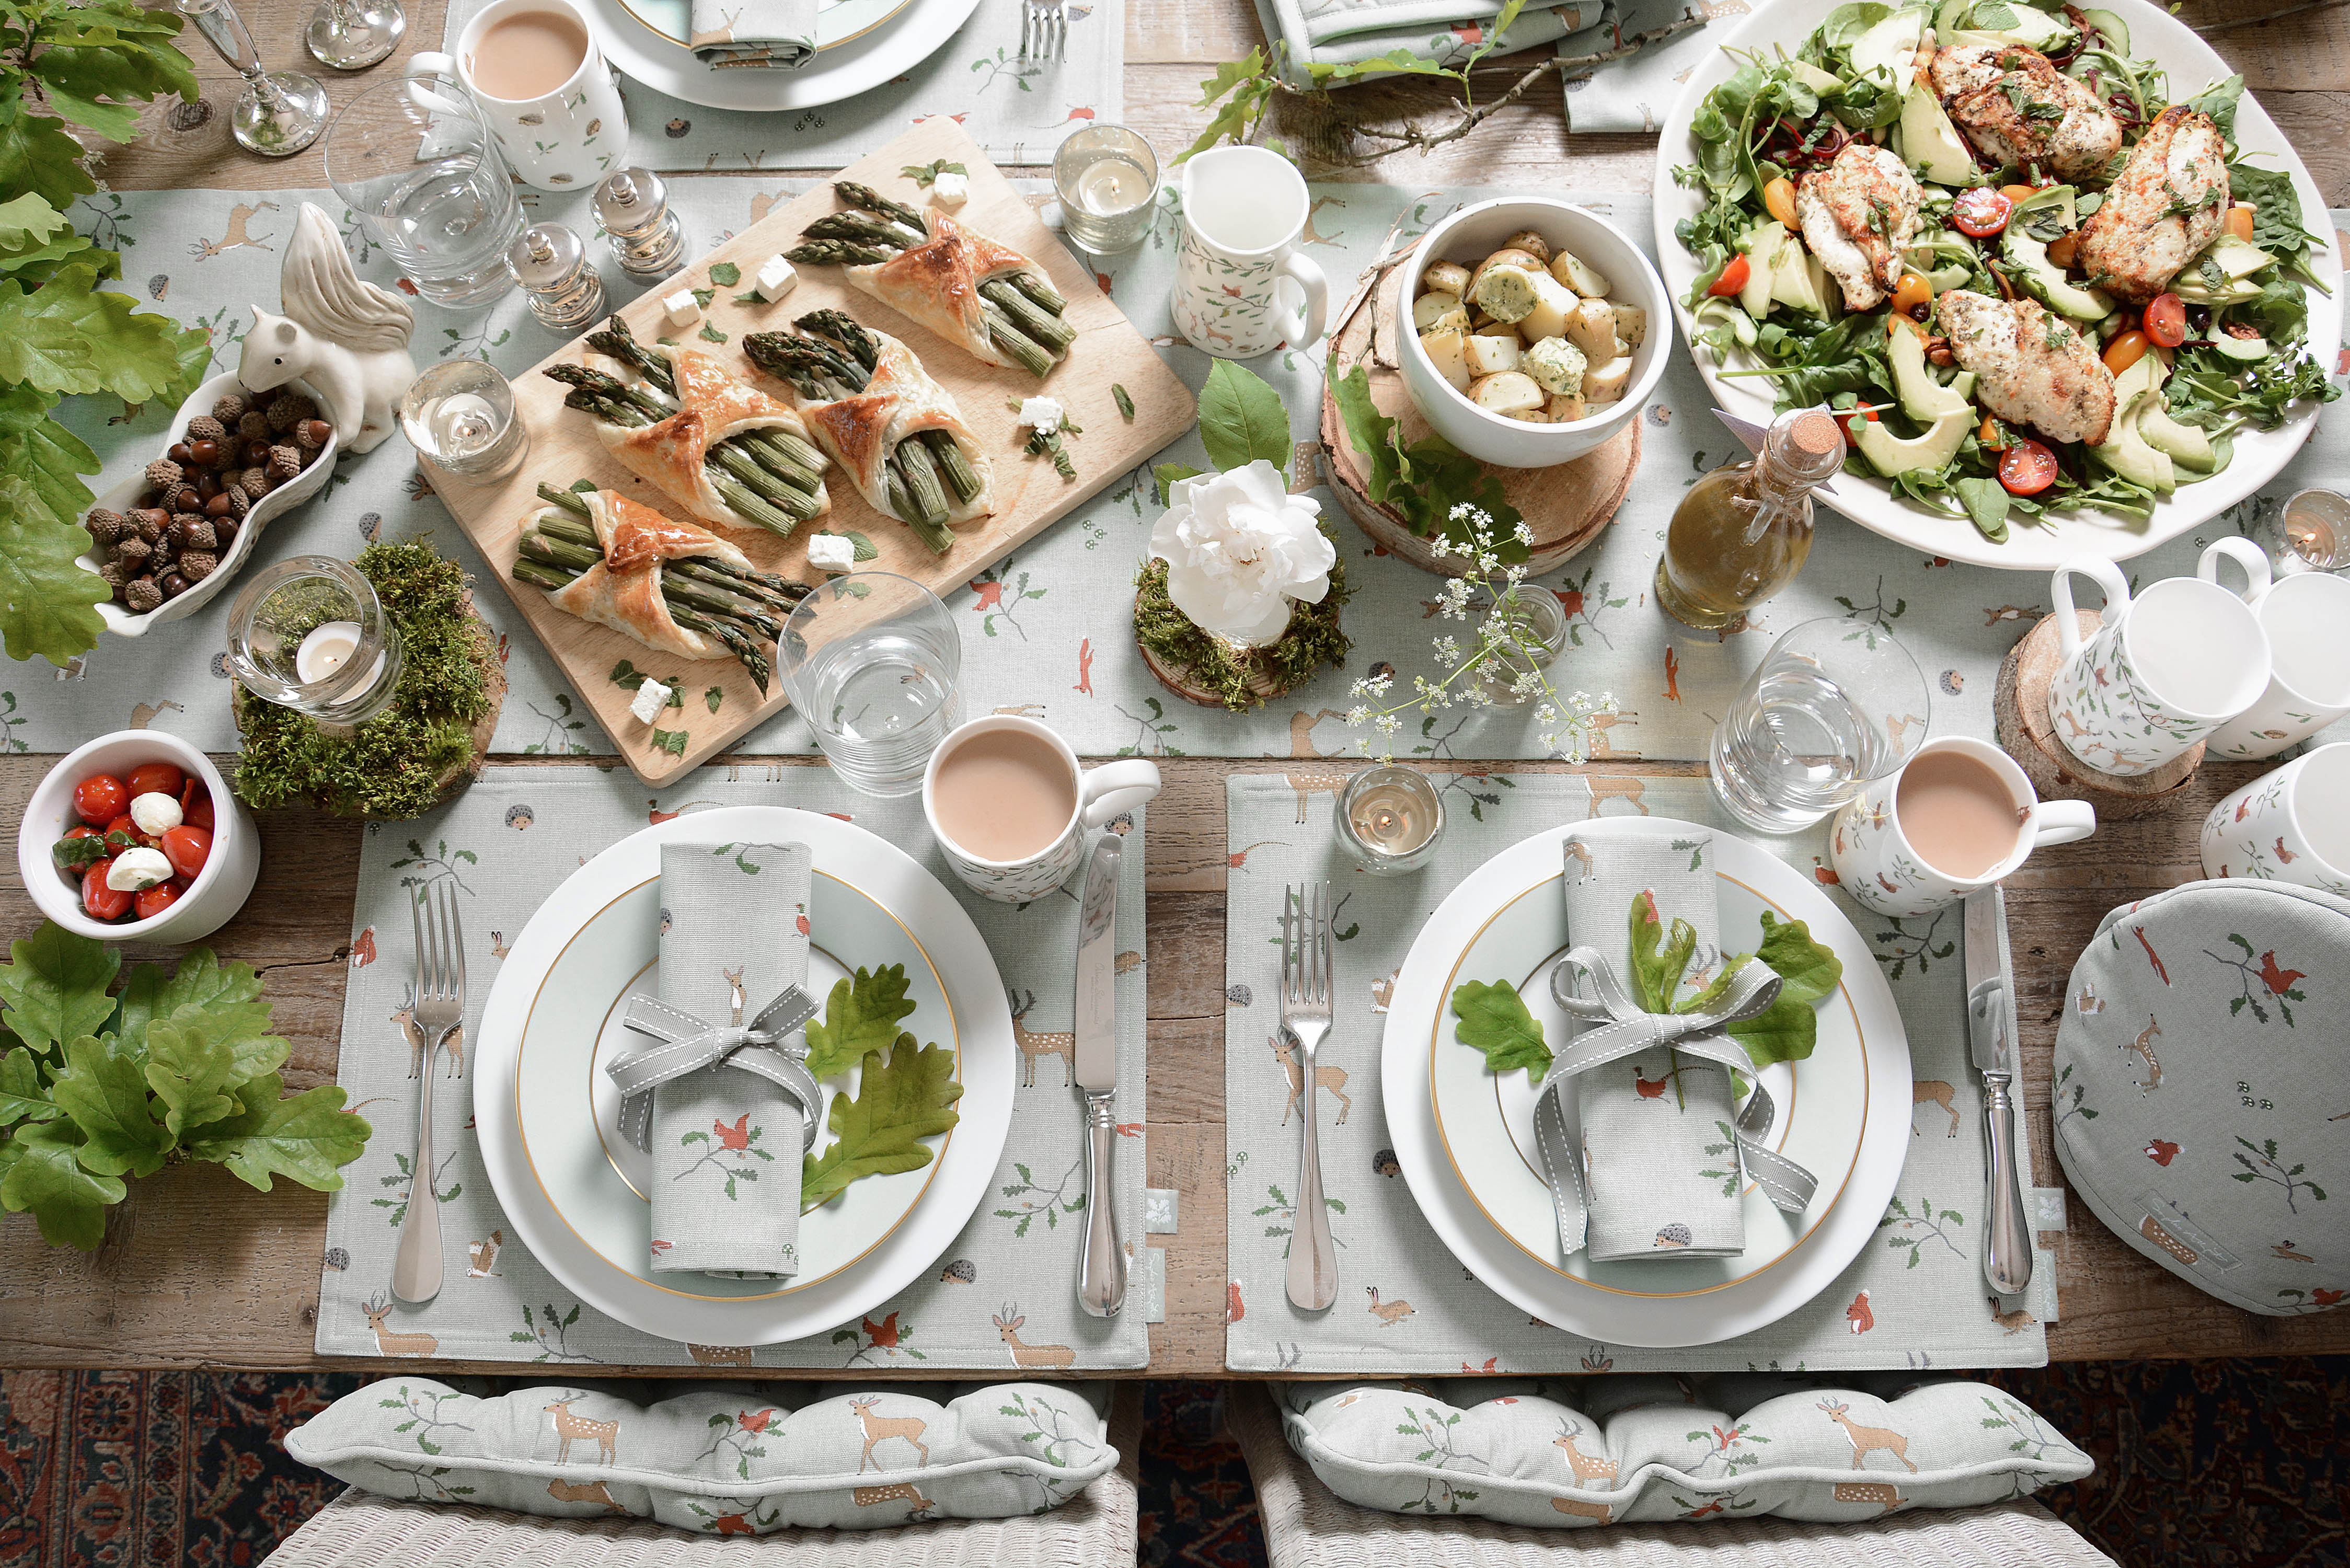 Picturesque woodland table setting full of food